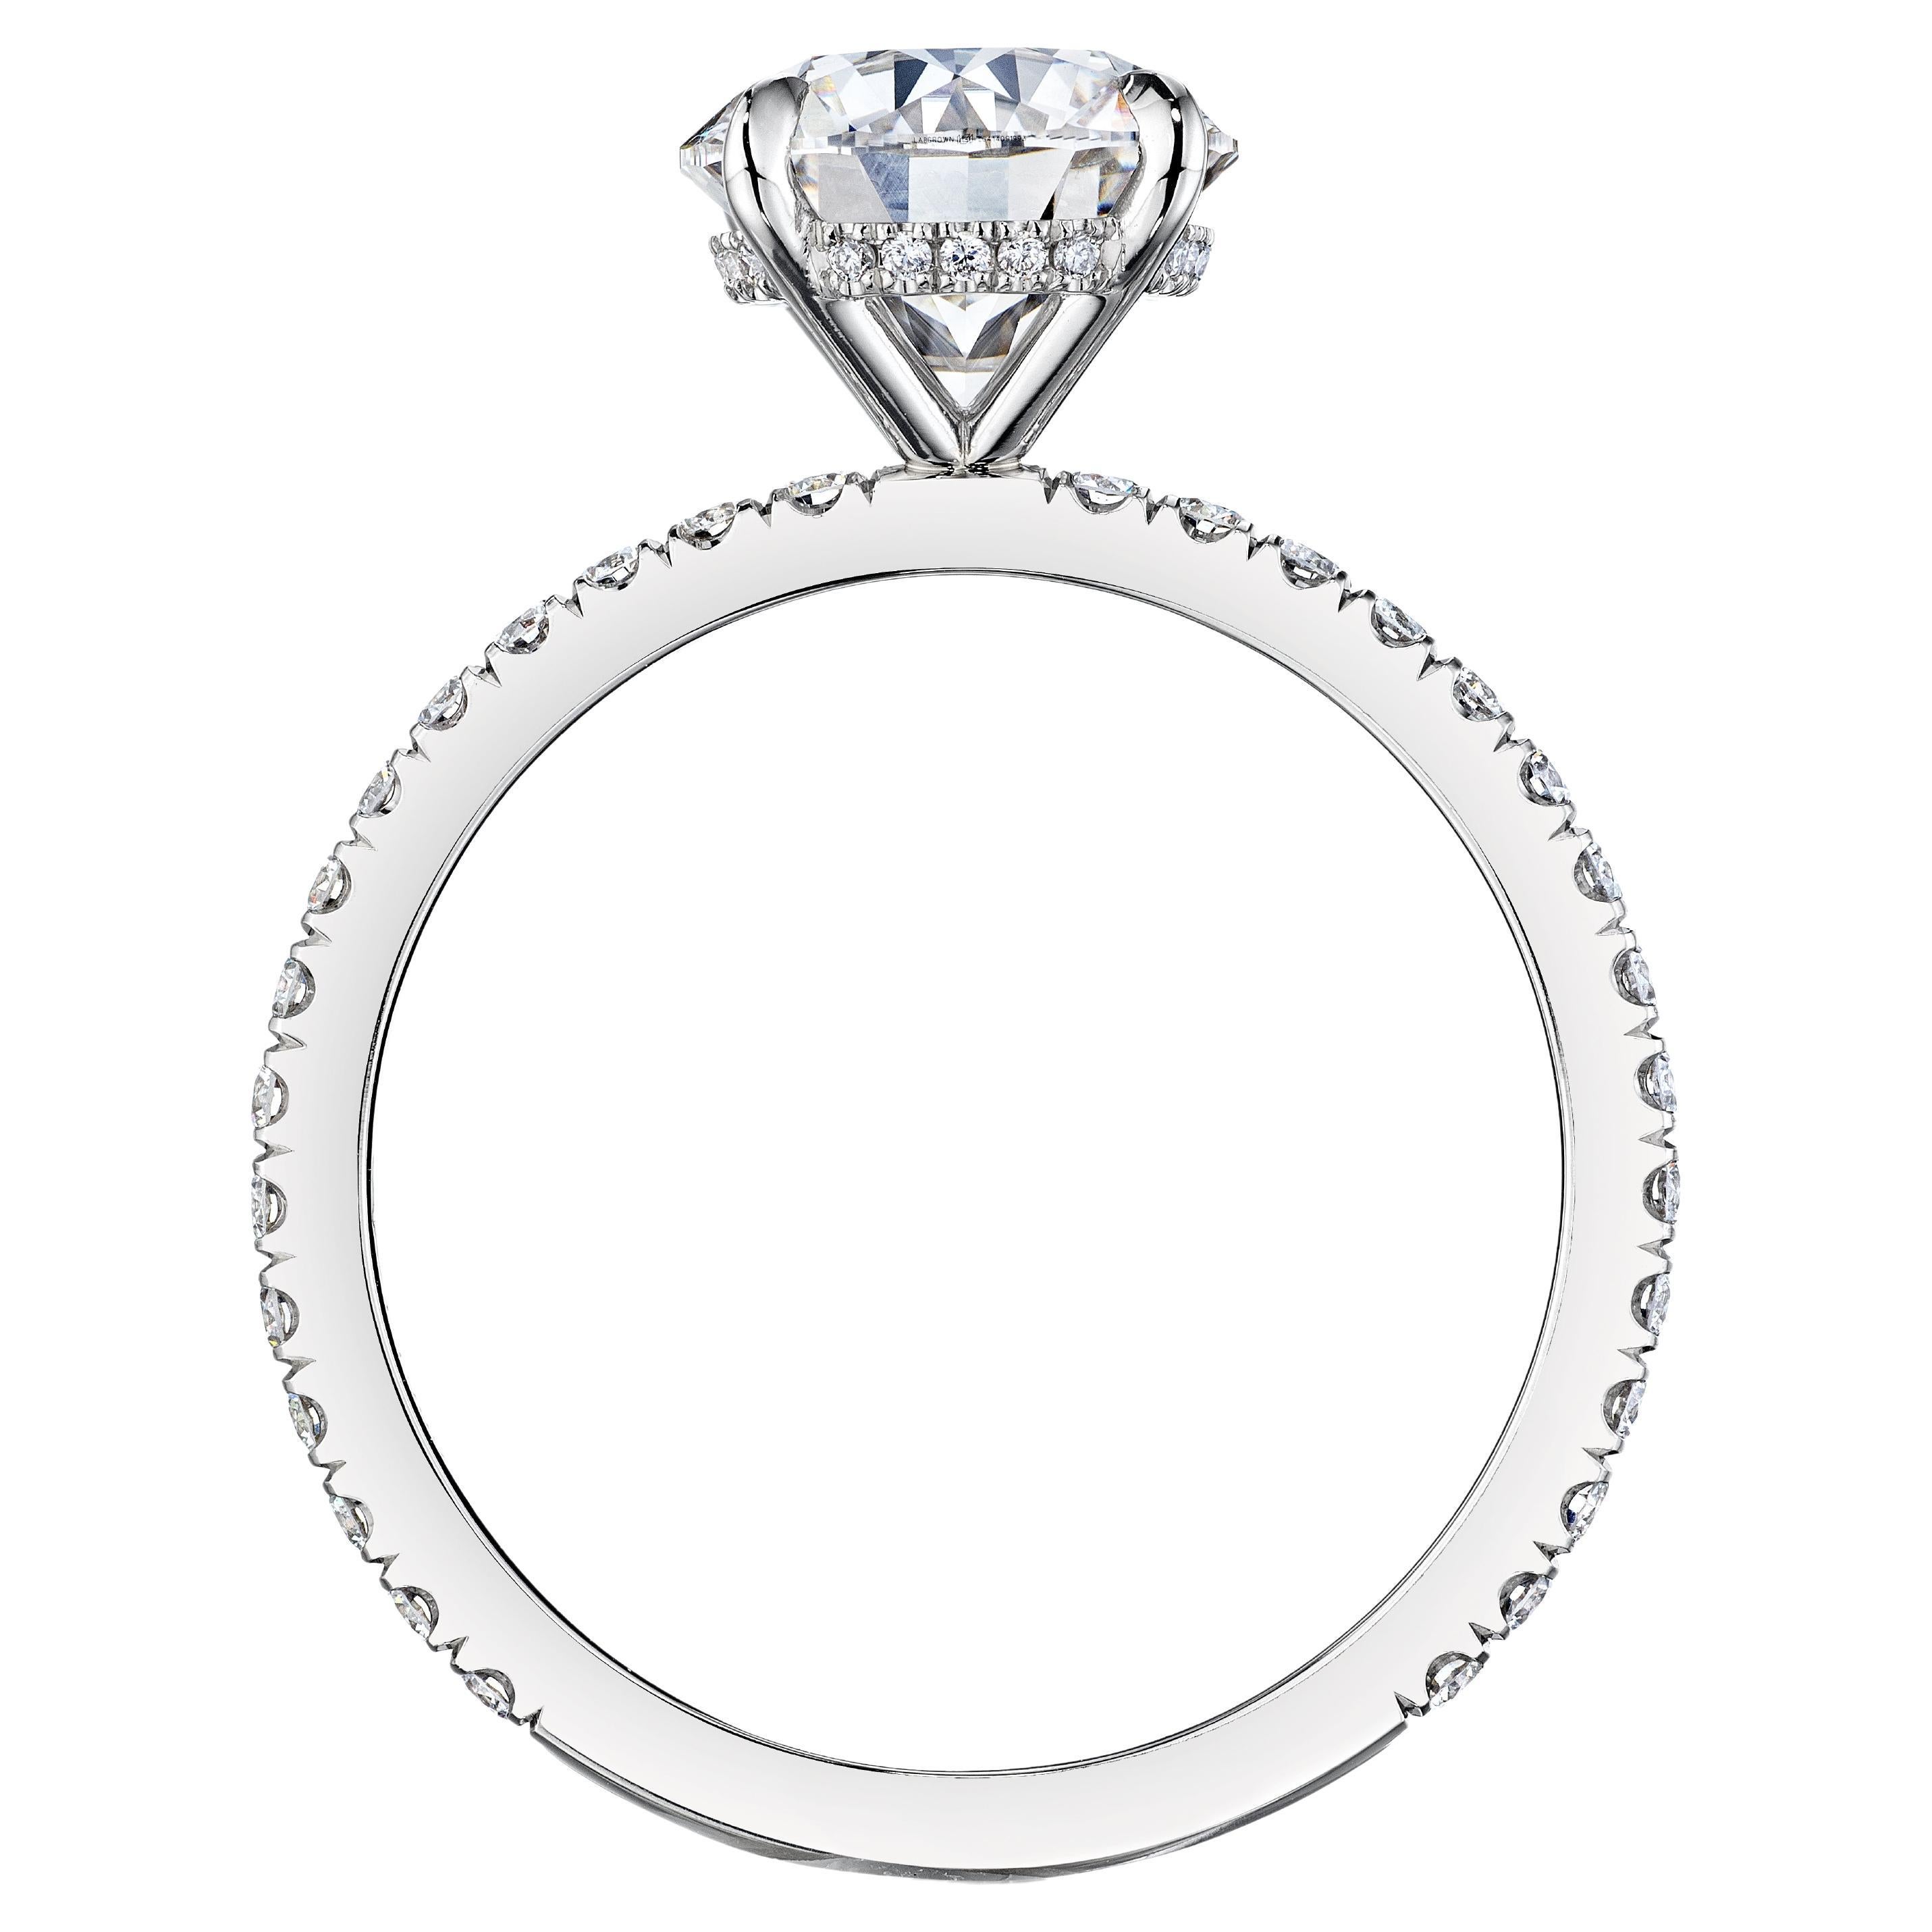 GIA Certified 2.01 Carat E VS1 Round Diamond Engagement Ring "Journey" For Sale